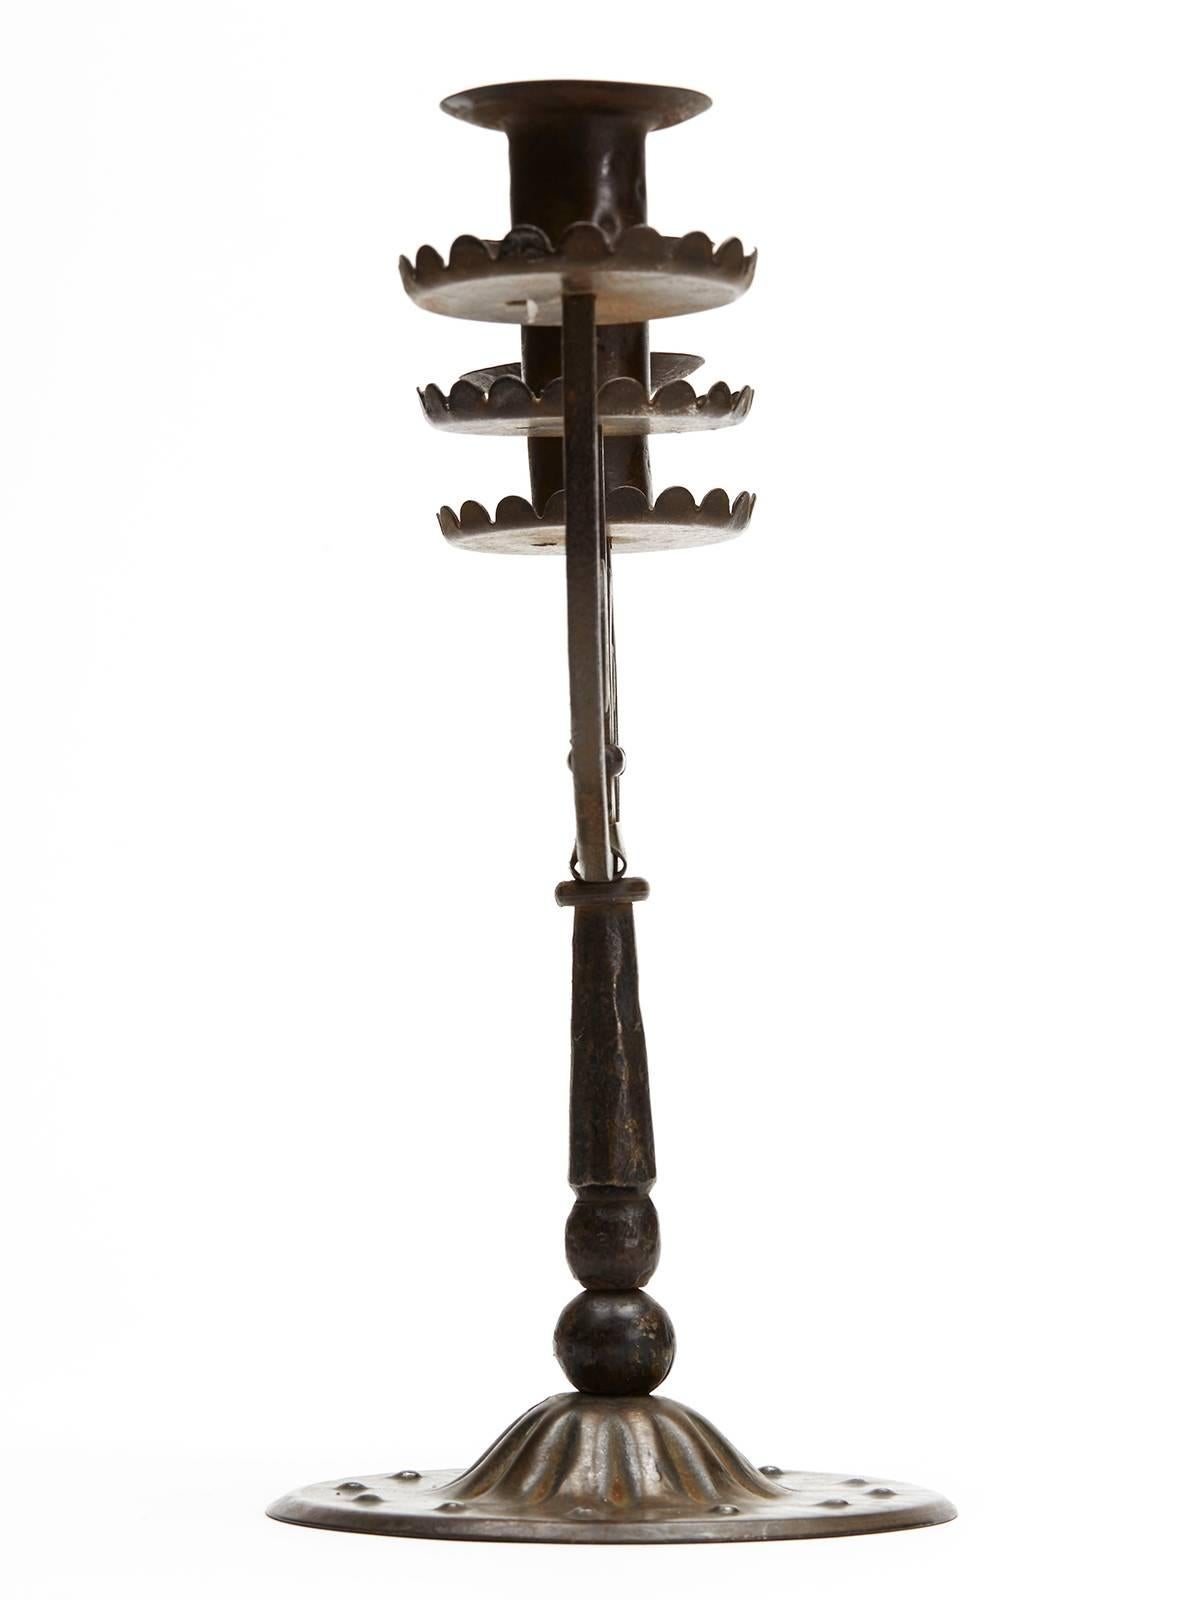 Early 20th Century Viennese Secessionist Hugo Berger Candlestick, circa 1900